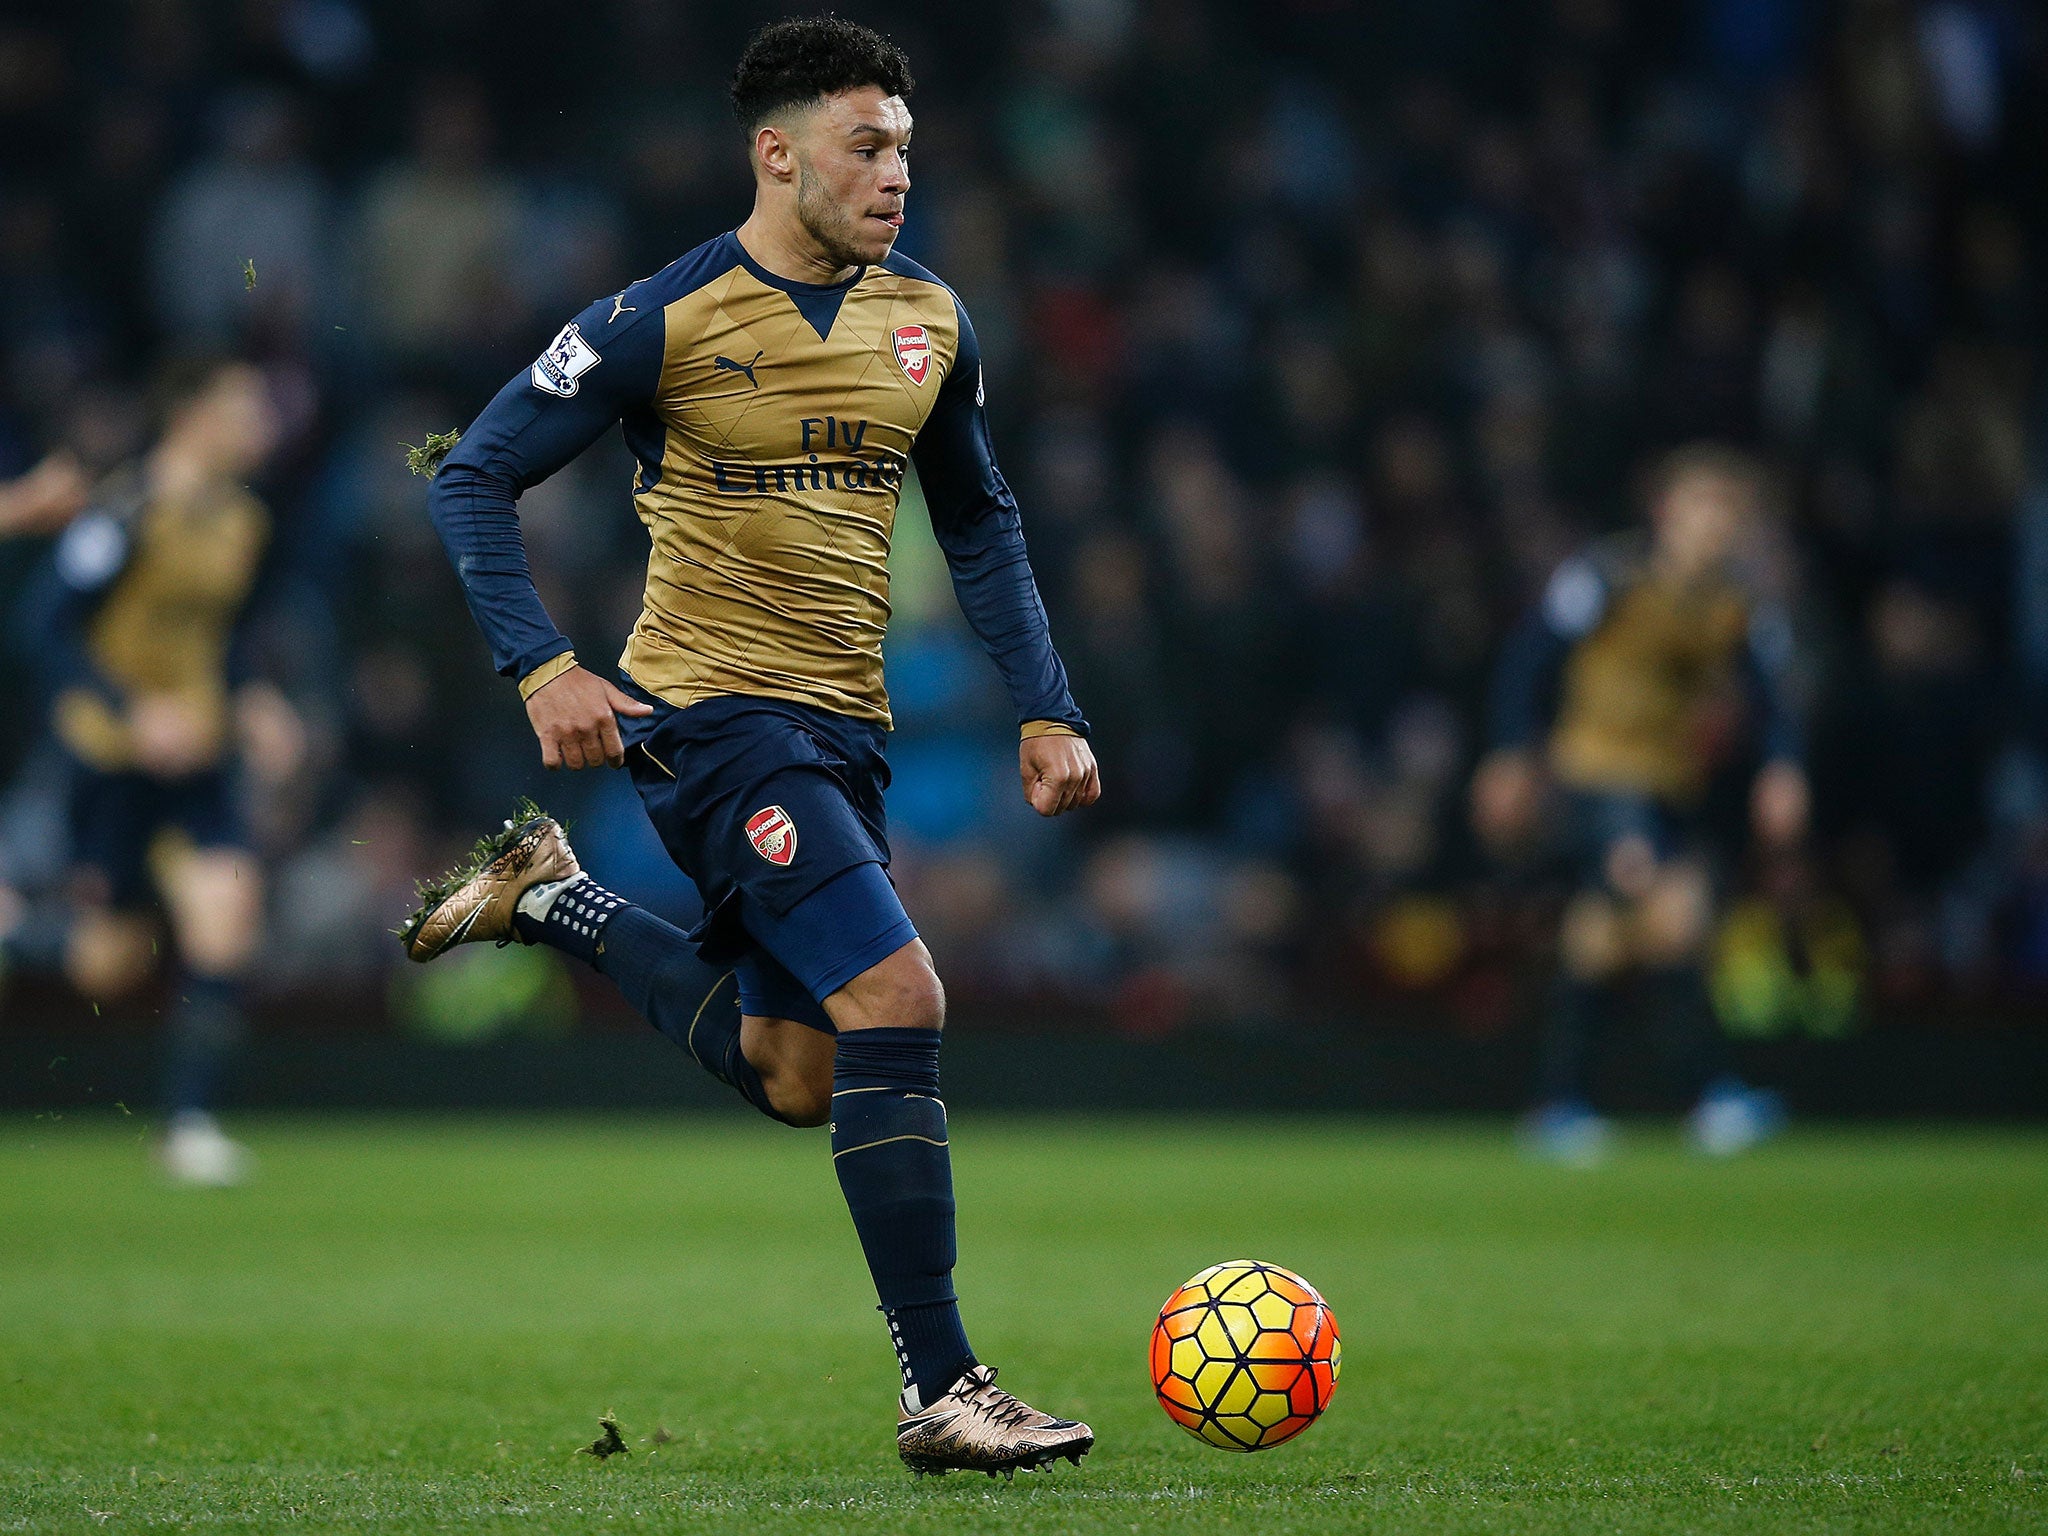 Alex Oxlade-Chamberlain could return to the Arsenal starting line-up against Bournemouth